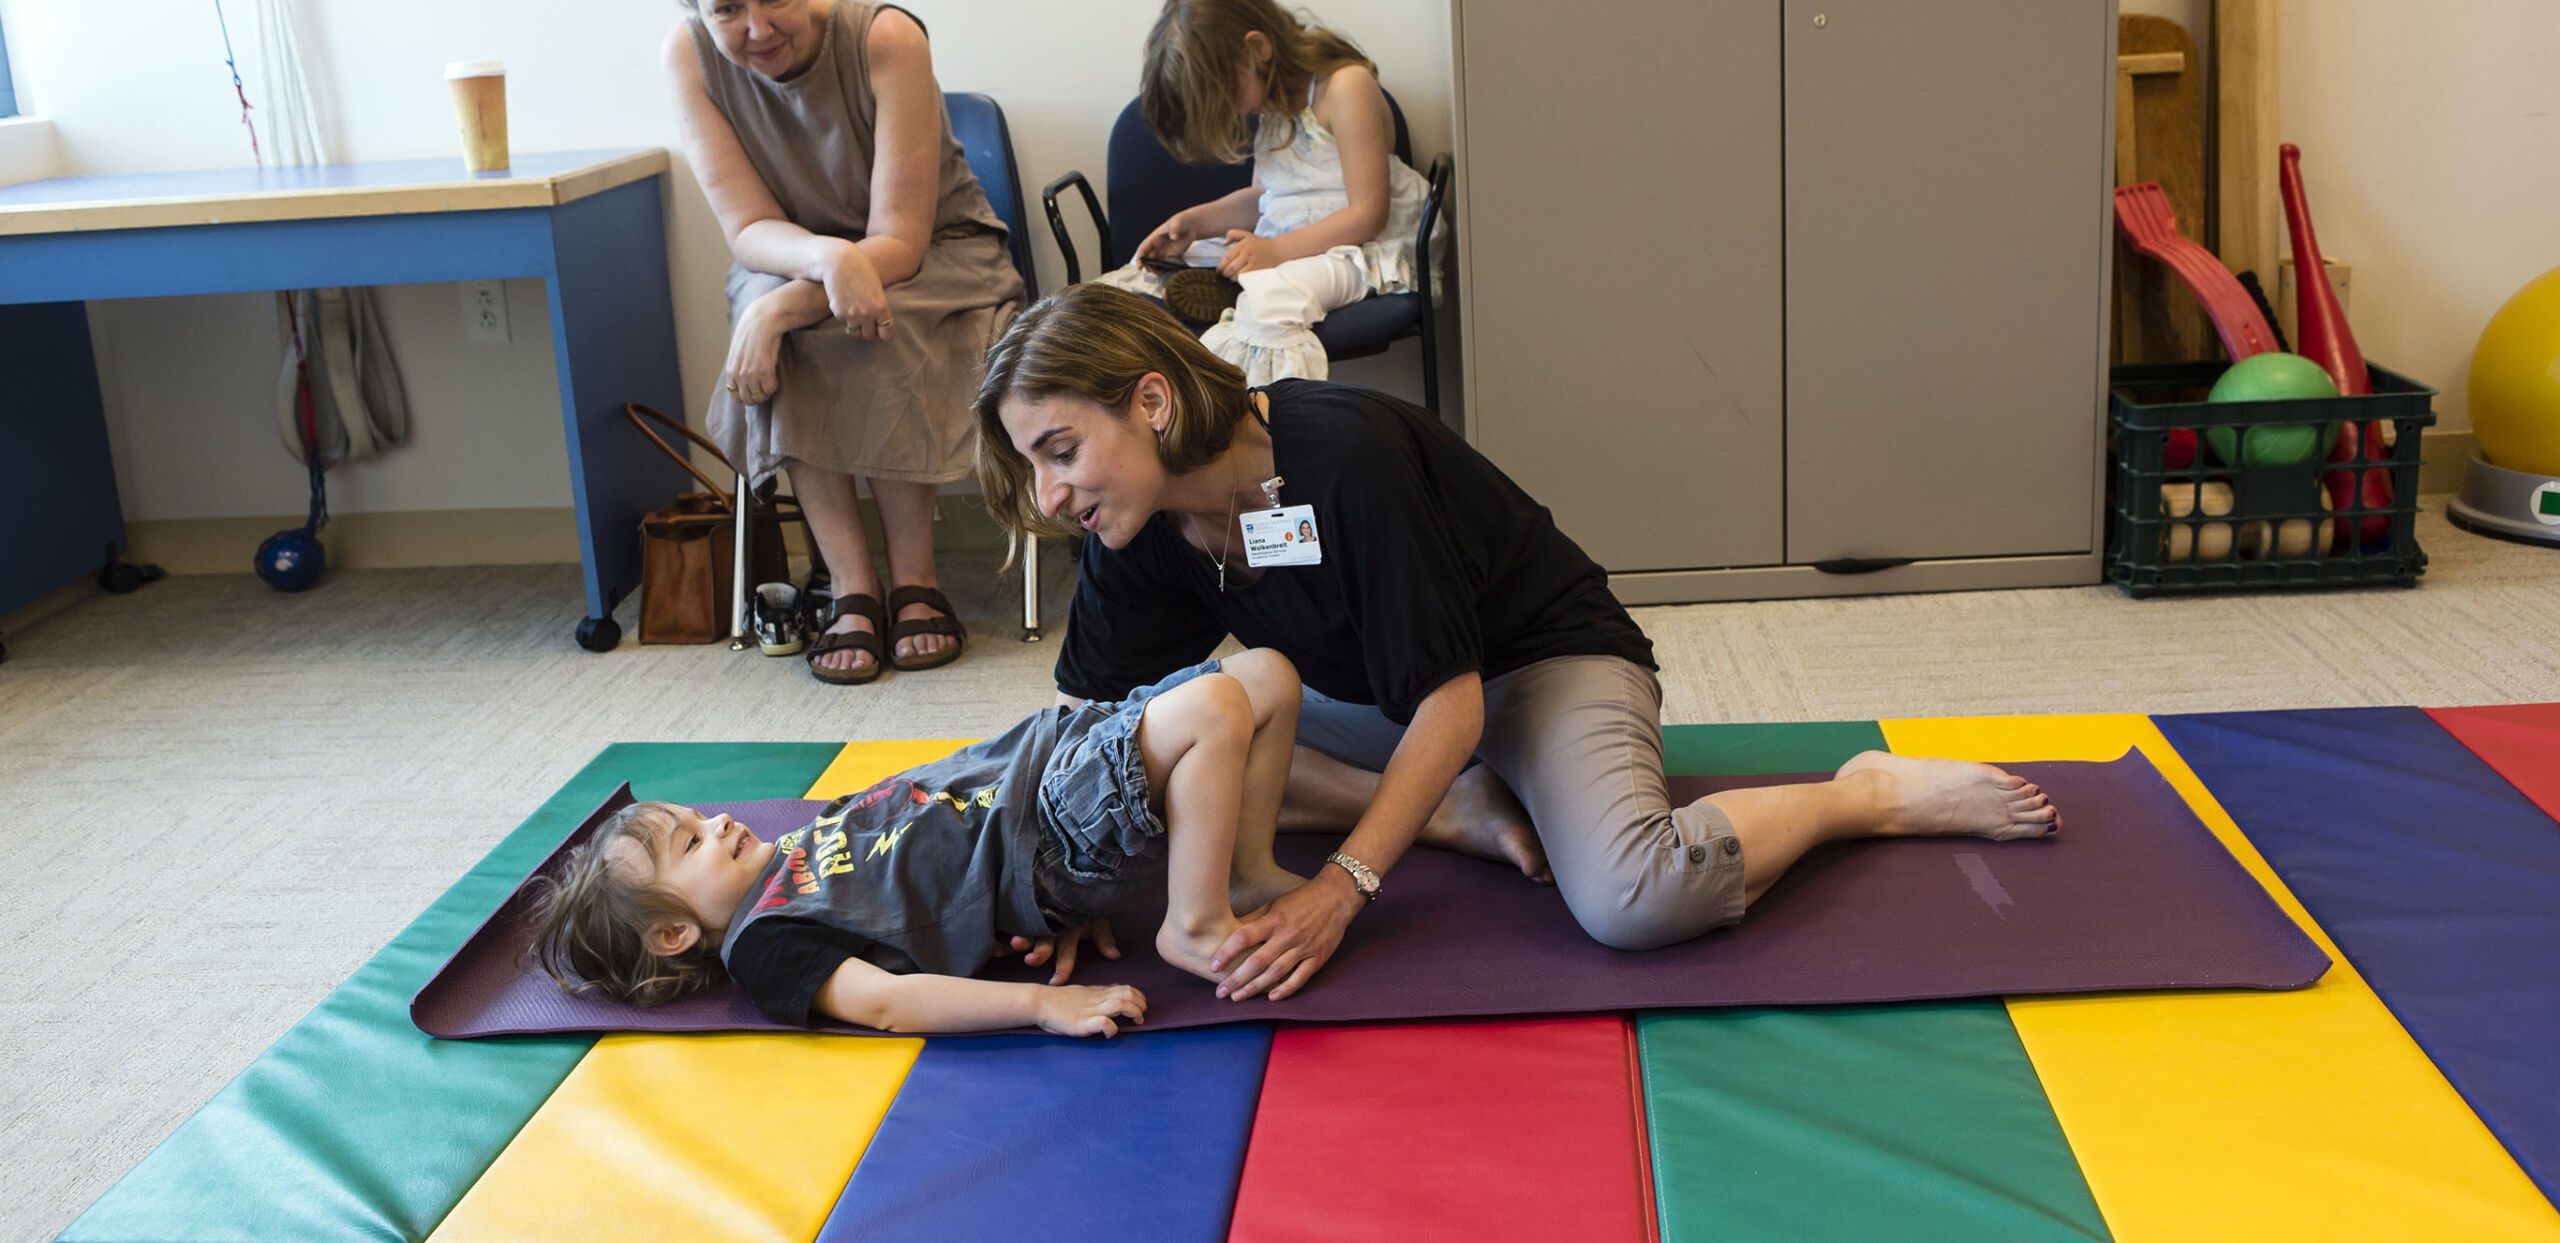 Occupational therapist works with young patient on floor exercises at Cooley Dickinson Rehabilitation Services, Northampton, MA 01060.